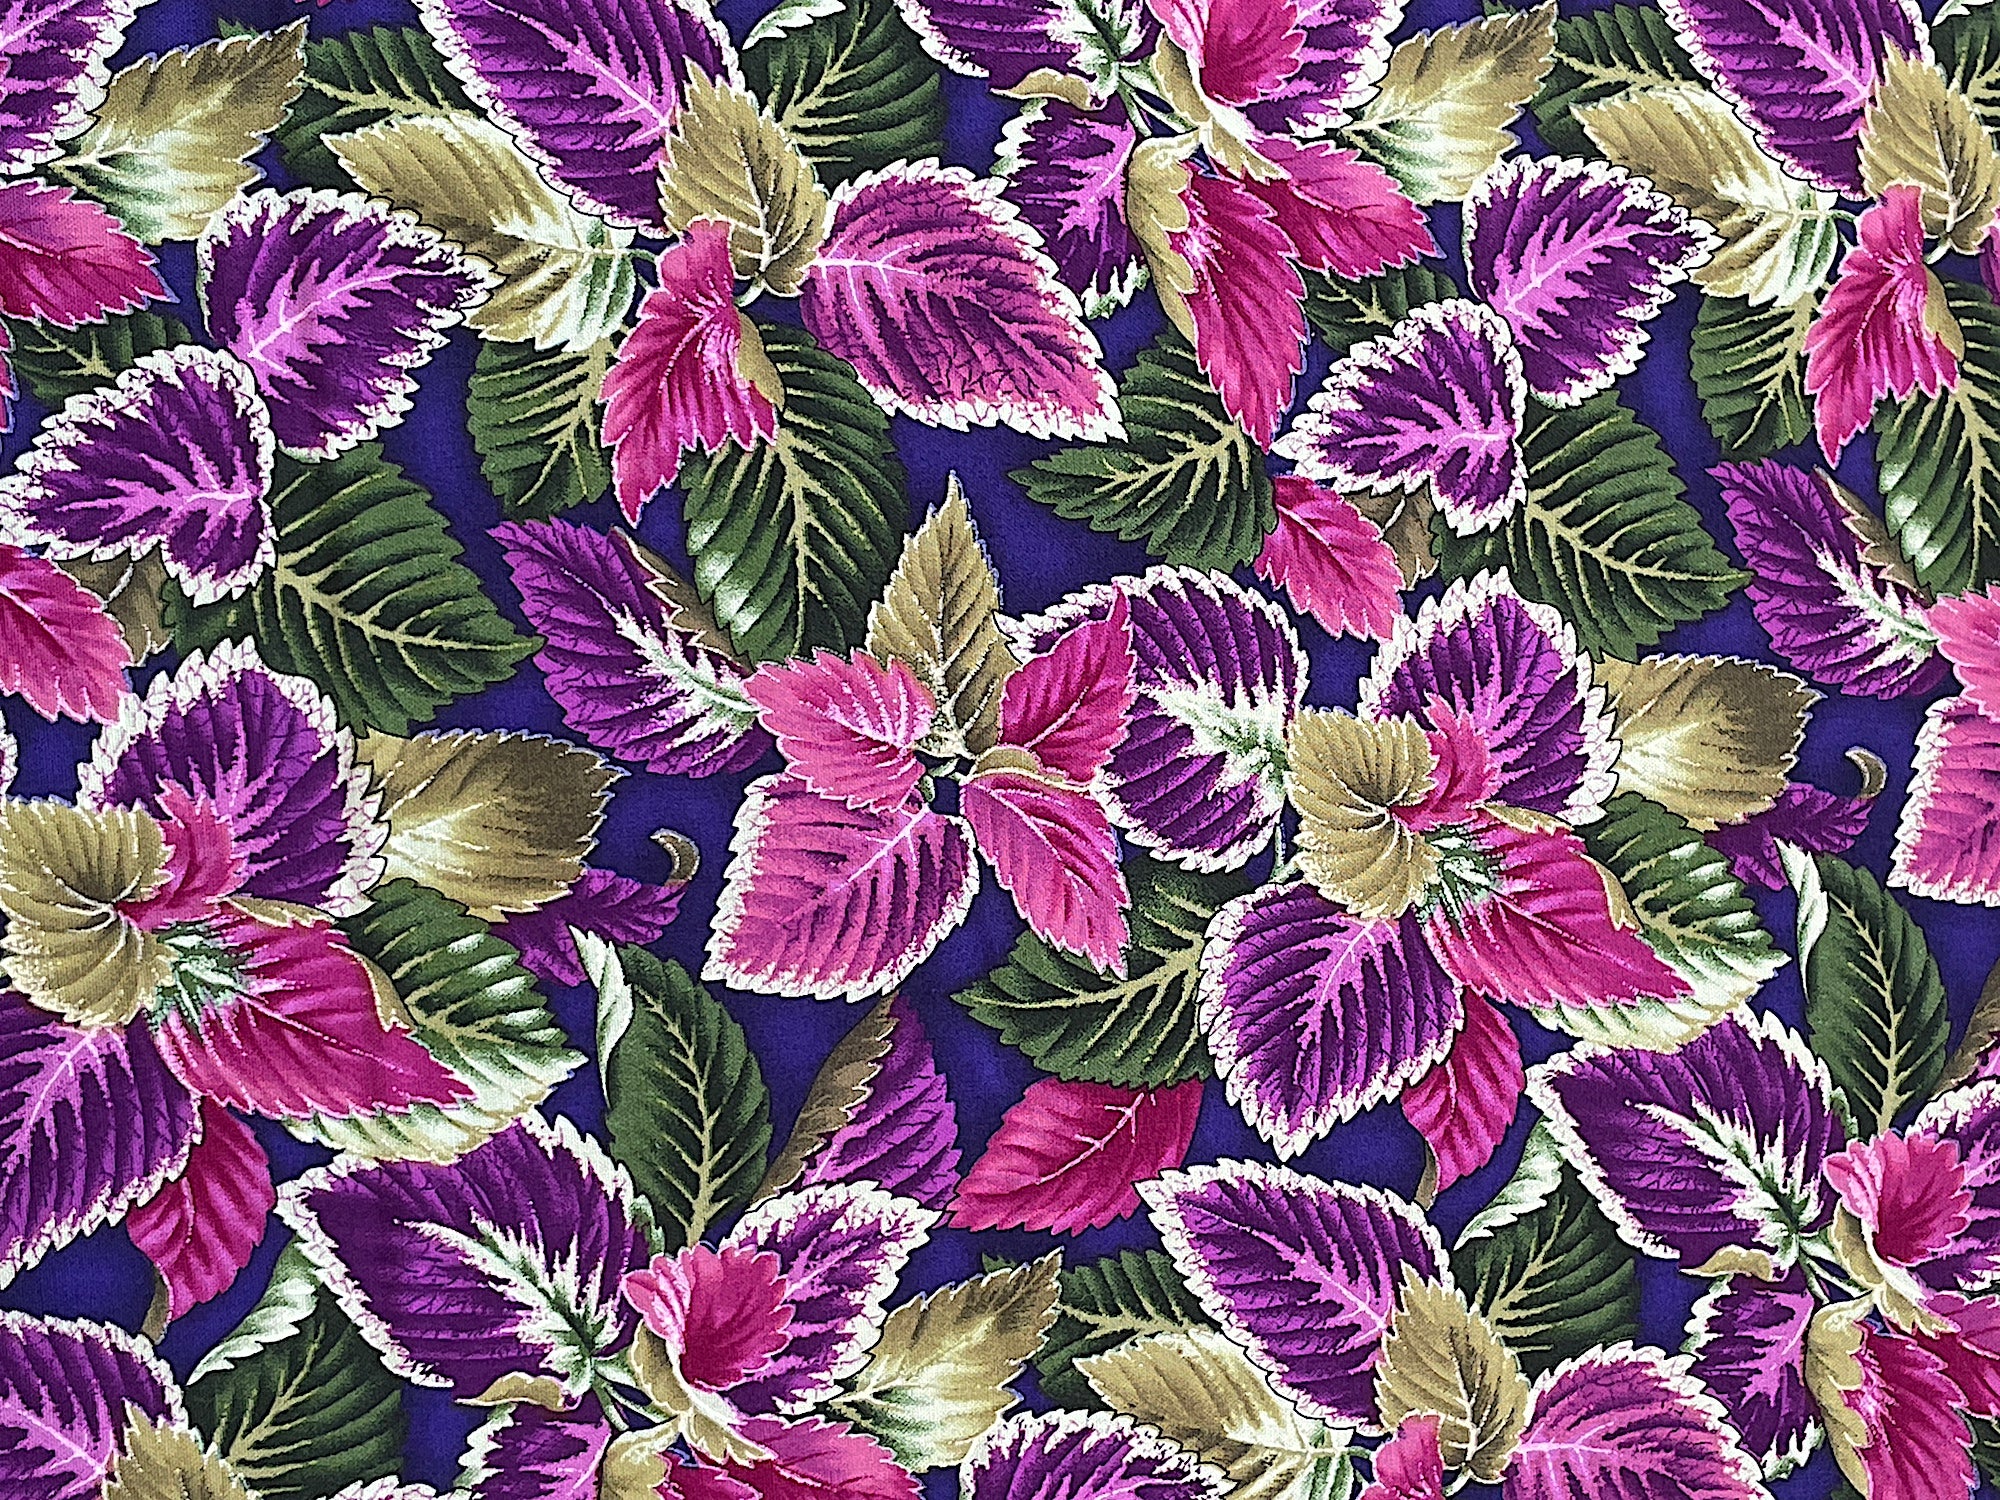 Cotton fabric covered with Coleus.